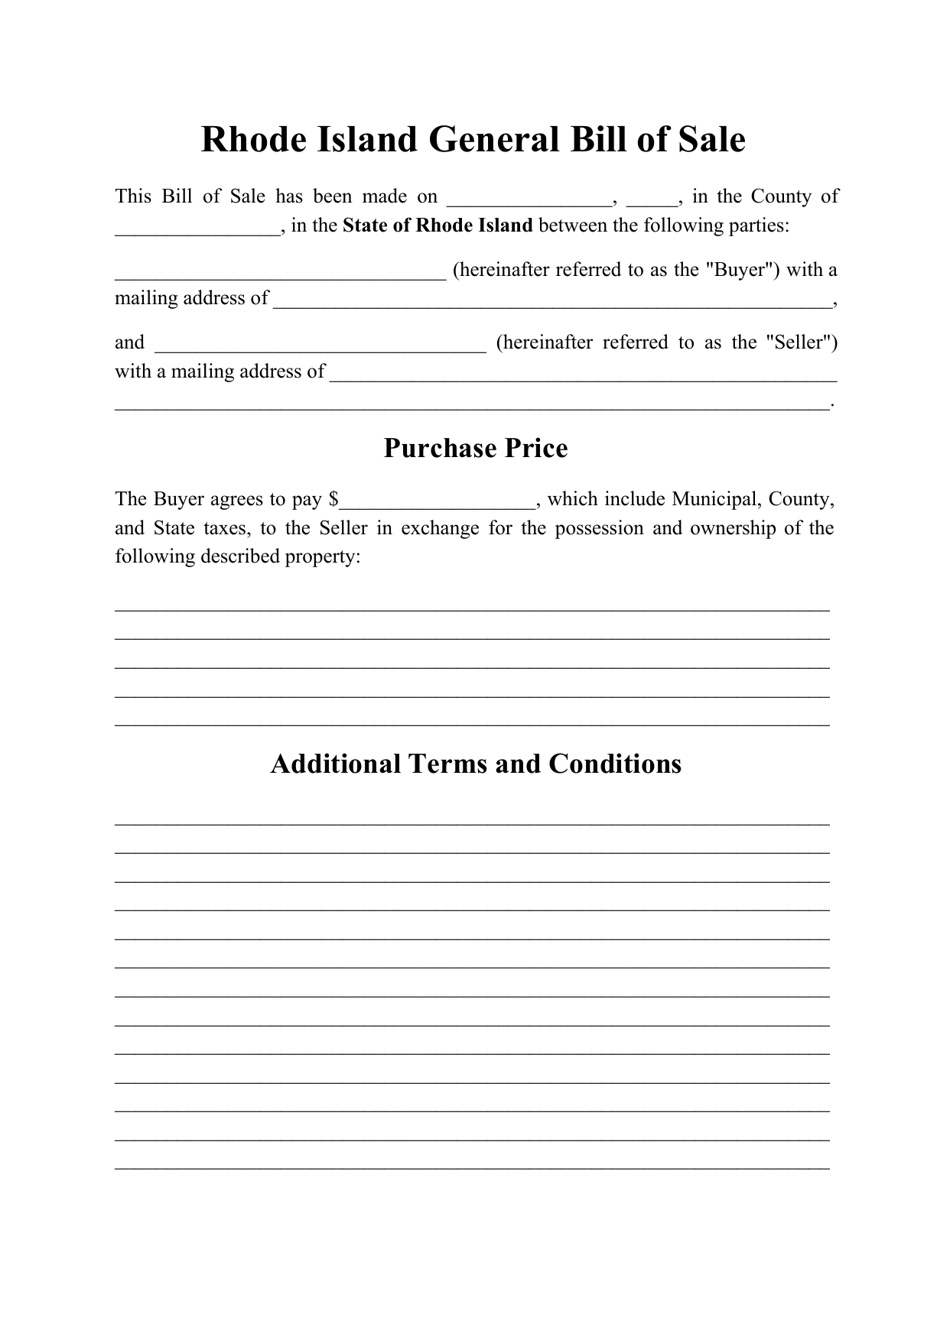 Generic Bill of Sale Form - Rhode Island, Page 1